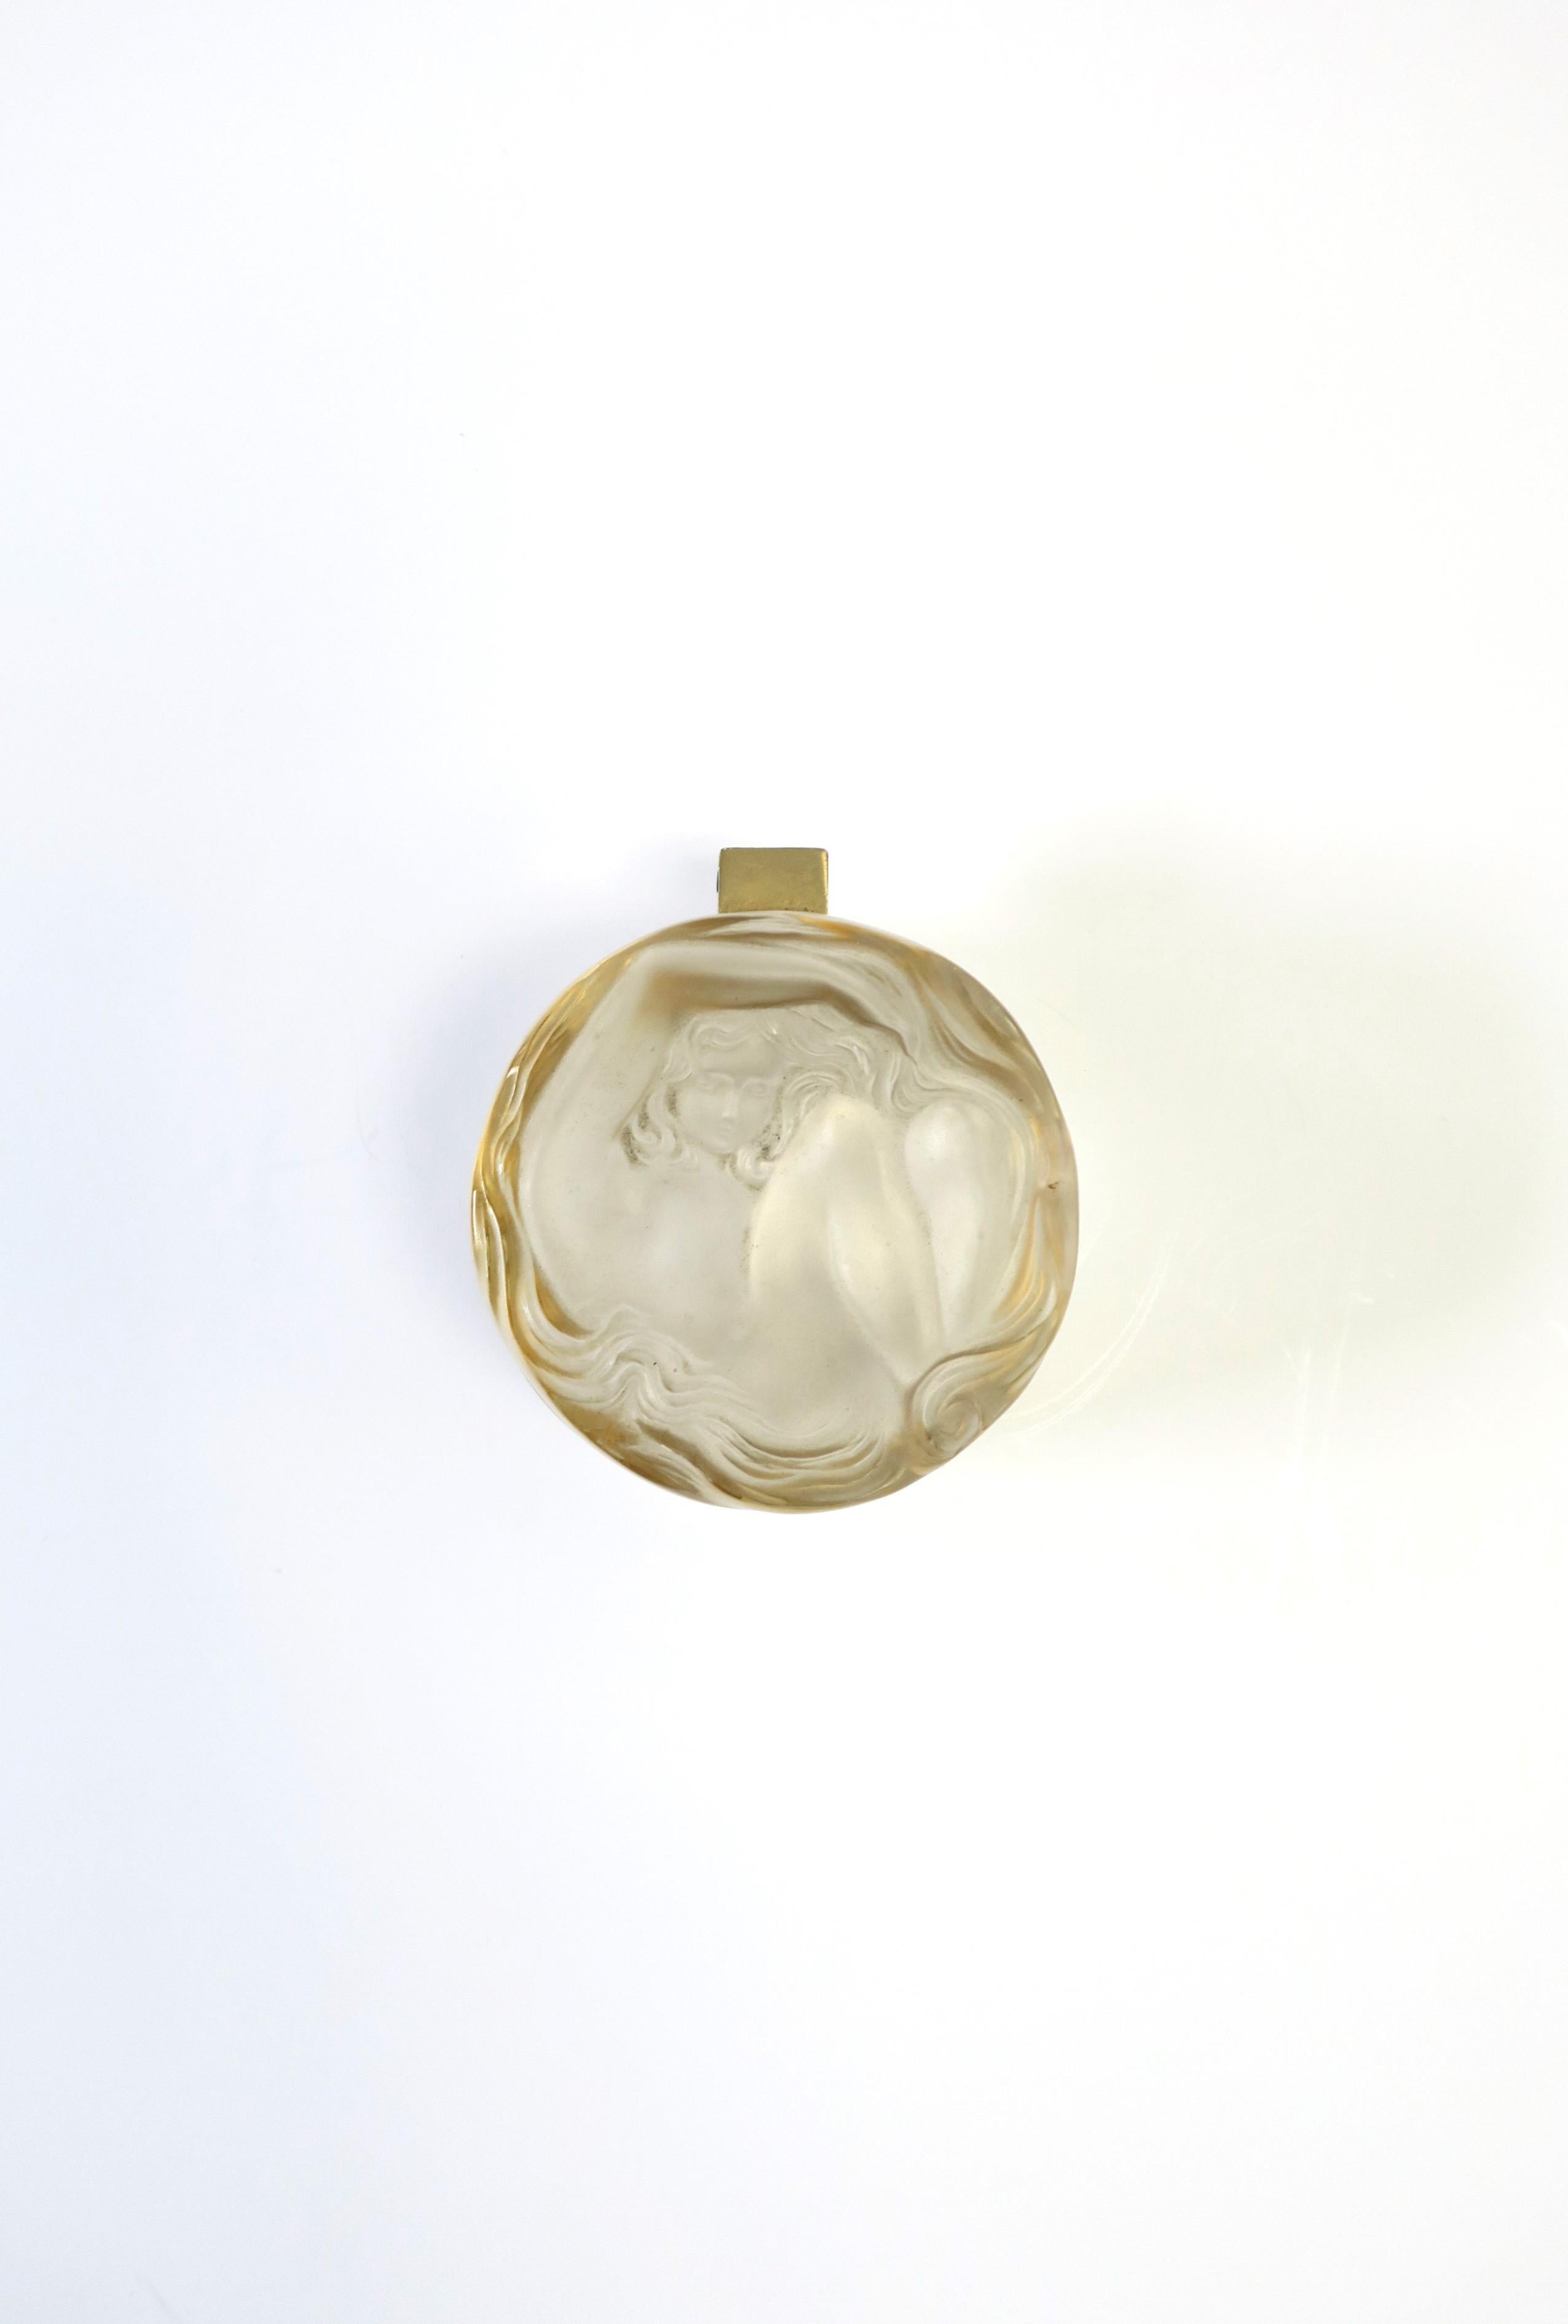 A beautiful and substantial French crystal and brass box with female figure by luxury design Maison, Lalique, in the Art Nouveau style, circa mid to late-20th-century, France. Crystal is clear with a matte translucent surface and brass hardware. A